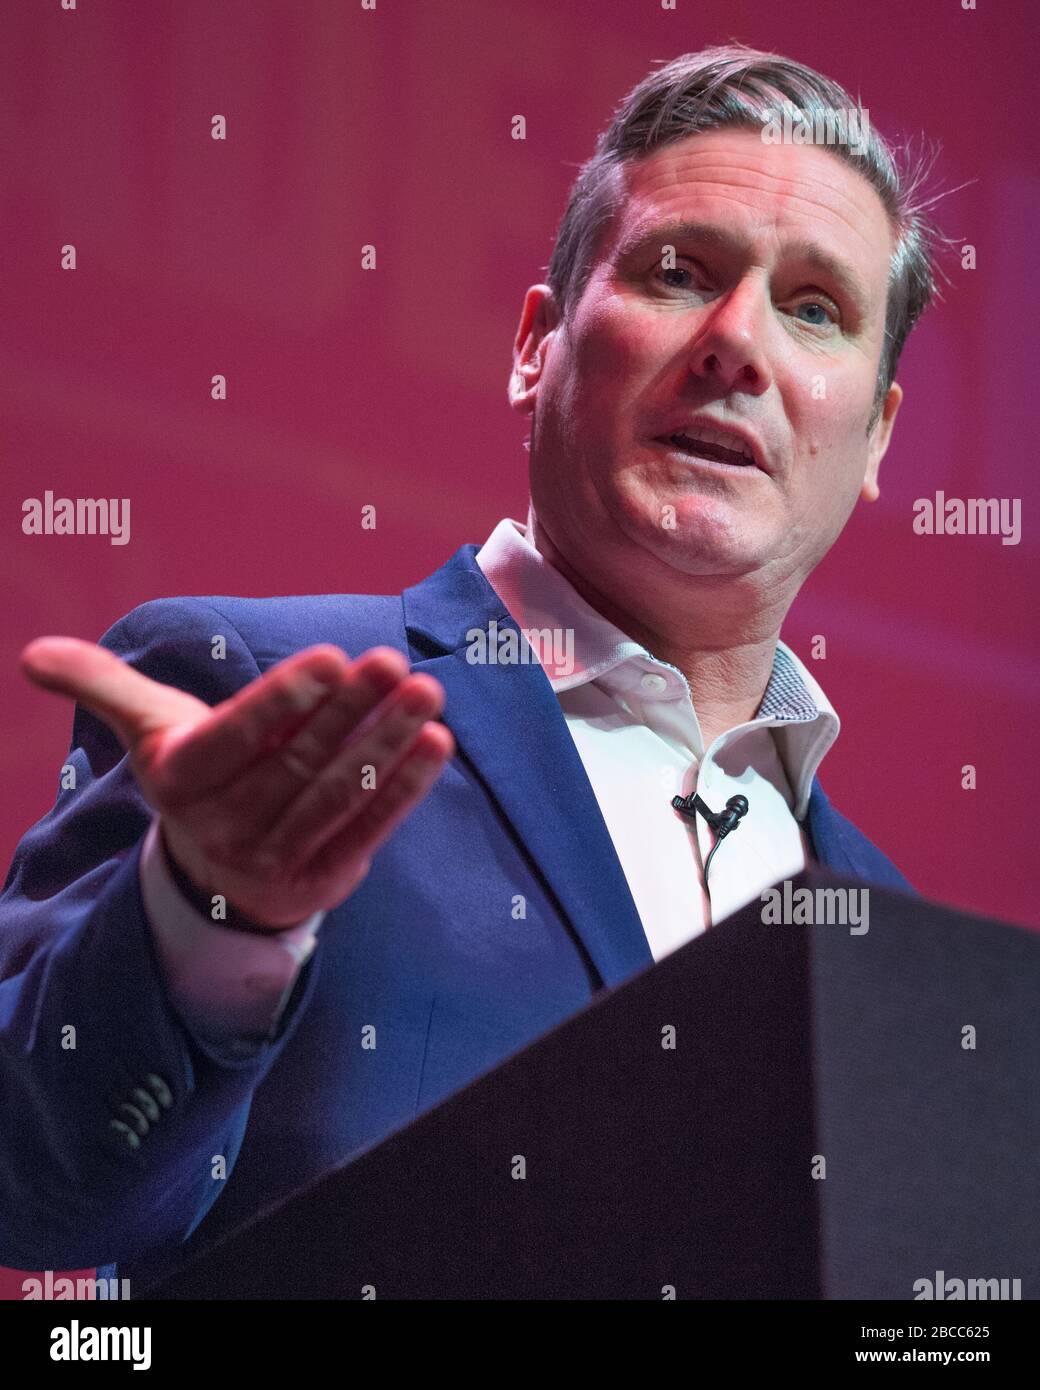 STOCK IMAGE RE-EDITS Glasgow, UK. 15 February 2020. Sir Keir Starmer wins the Leadership for the UK Labour Party with 56.2% of votes in the first round of polling, with Rebecca ling-Bailey on 27.6% and Lisa Nandy on 16.2%. Picture is taken of UK Labour Party Hustings for the Labour Party Leadership 2020. Stock Photo